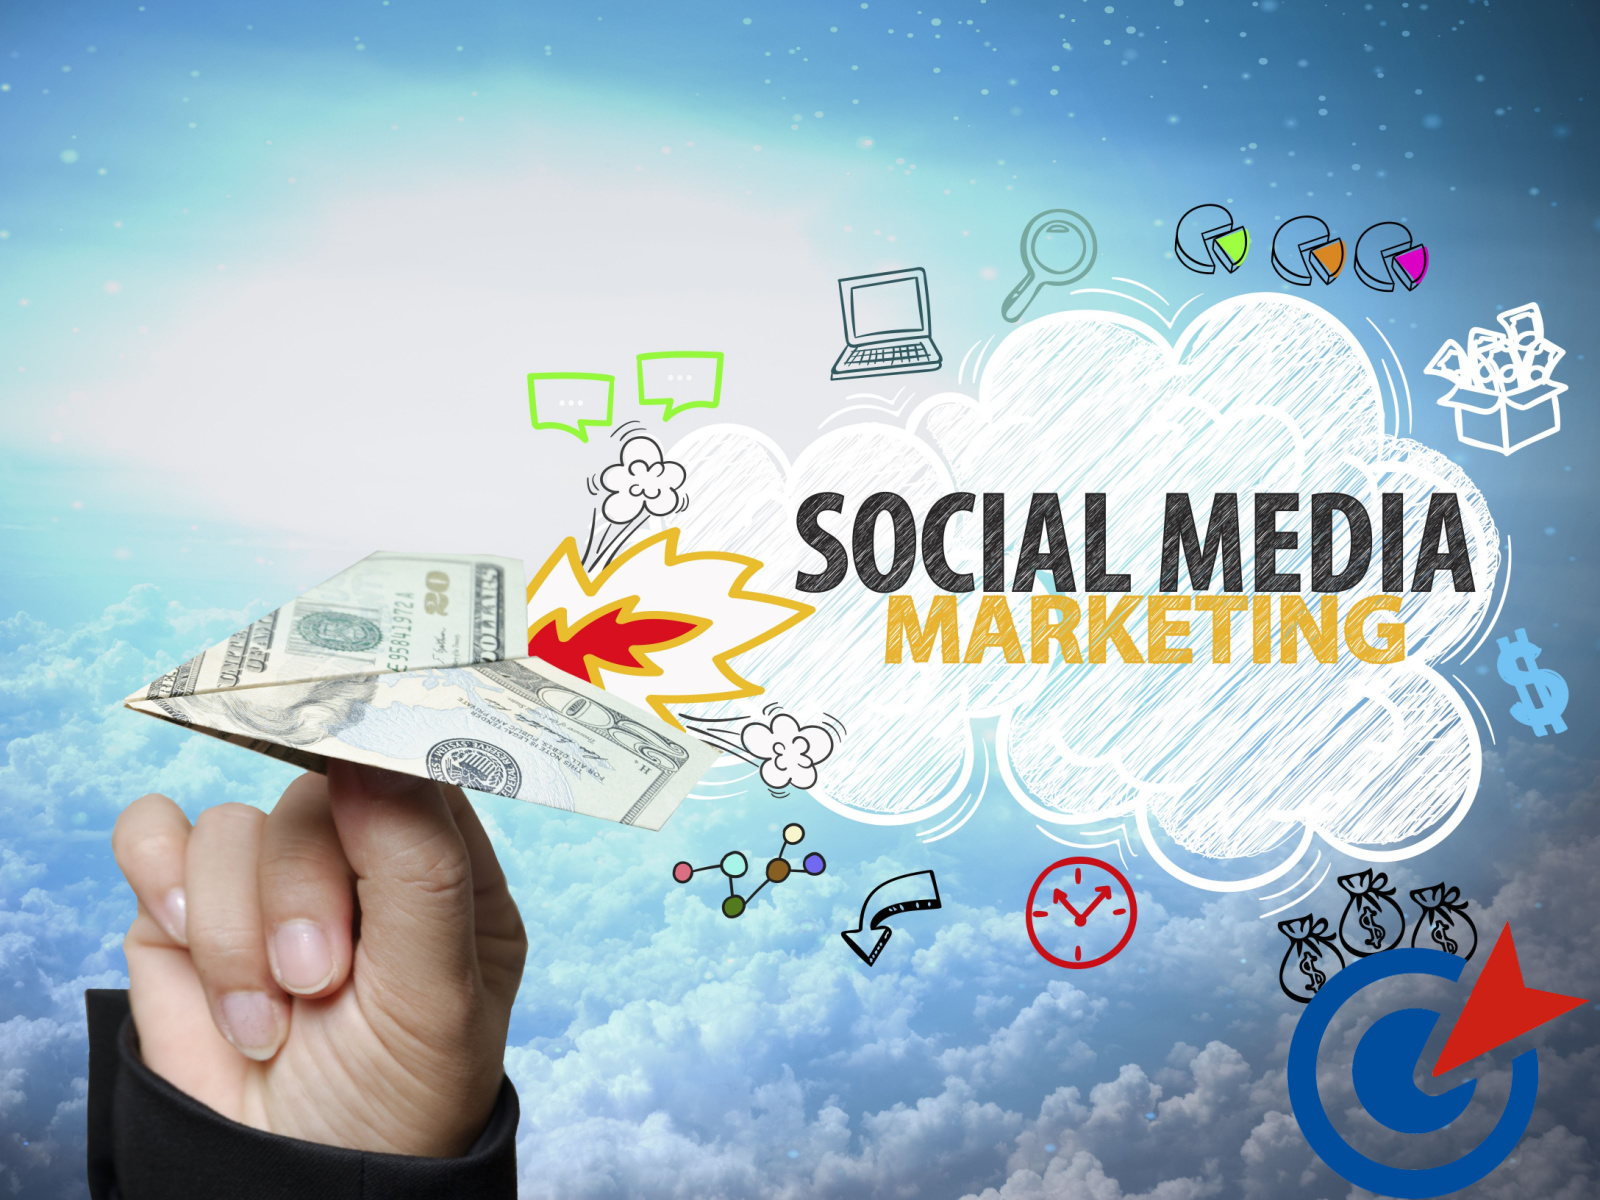 Catapult Your Business with Top Marketing Agency's Social Marketing Experience